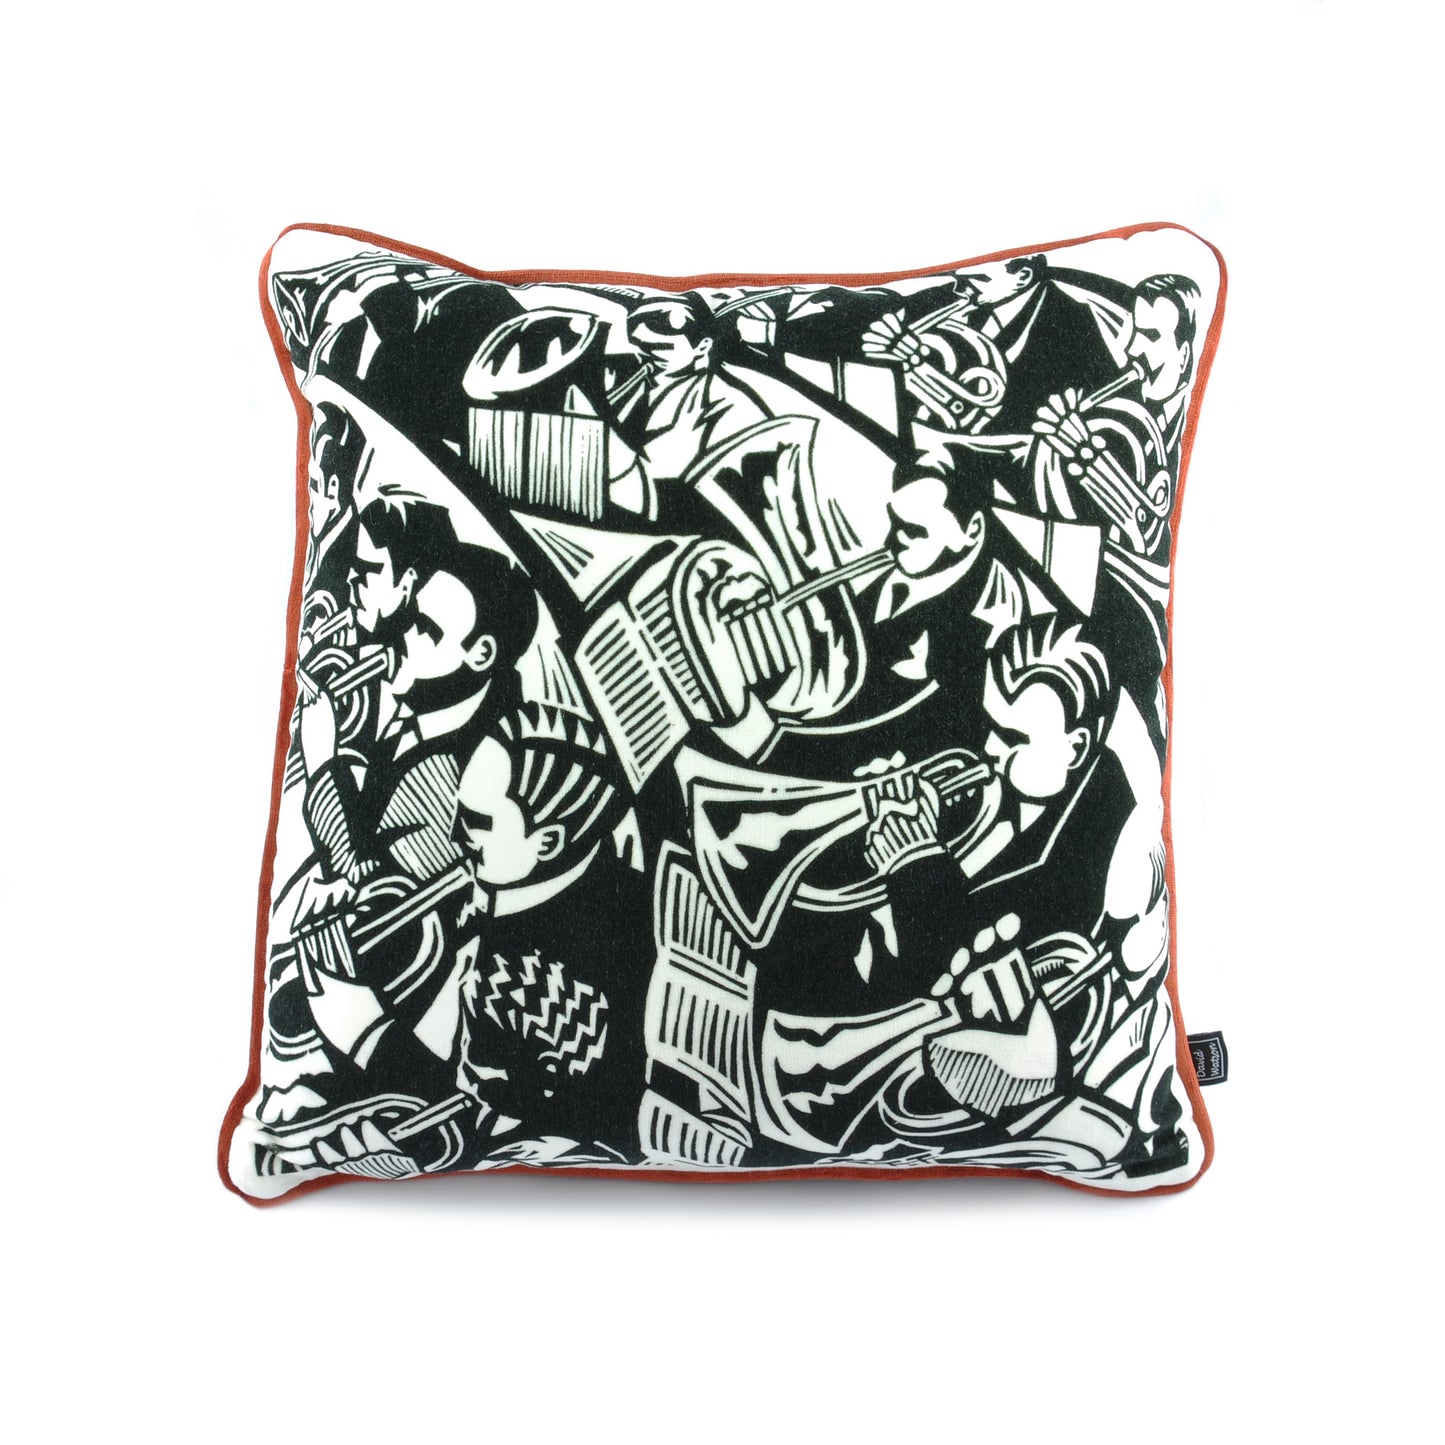 Luxury geo filled duck feather cushion with black and white music band design on cotton velvet cover and contrasting orange piped edging. Illustrations from Paul Cleden.